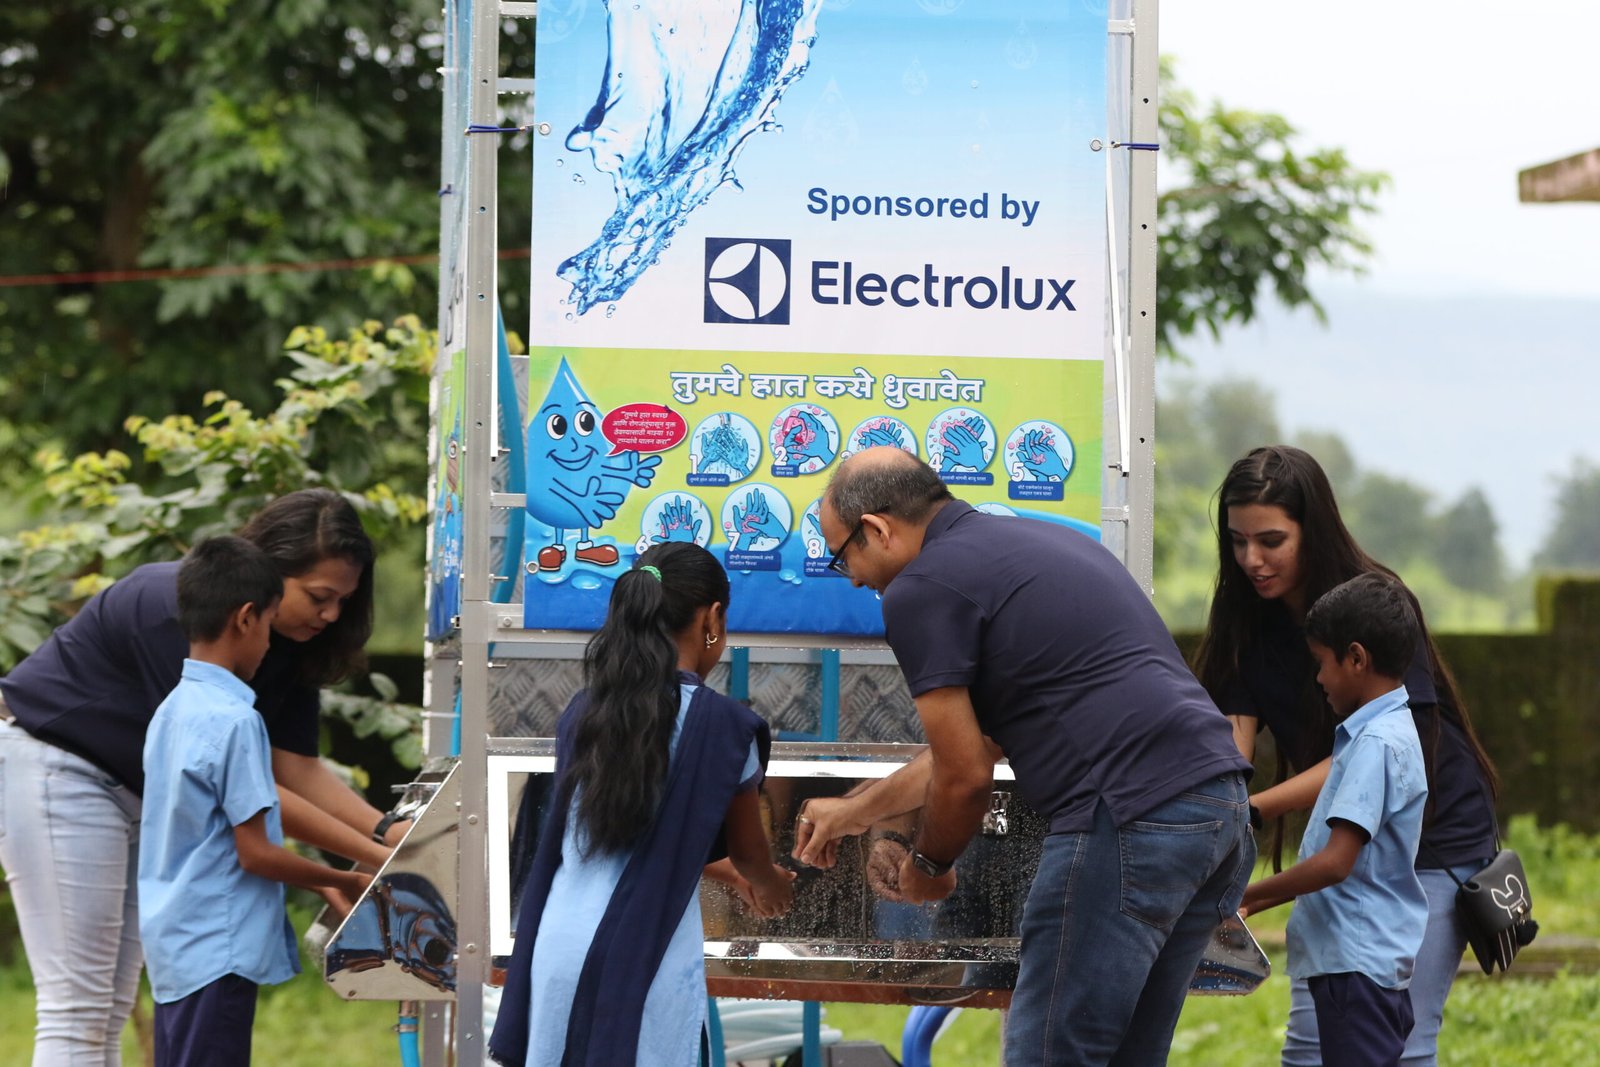 Electrolux volunteers showing children how to wash their hands scaled